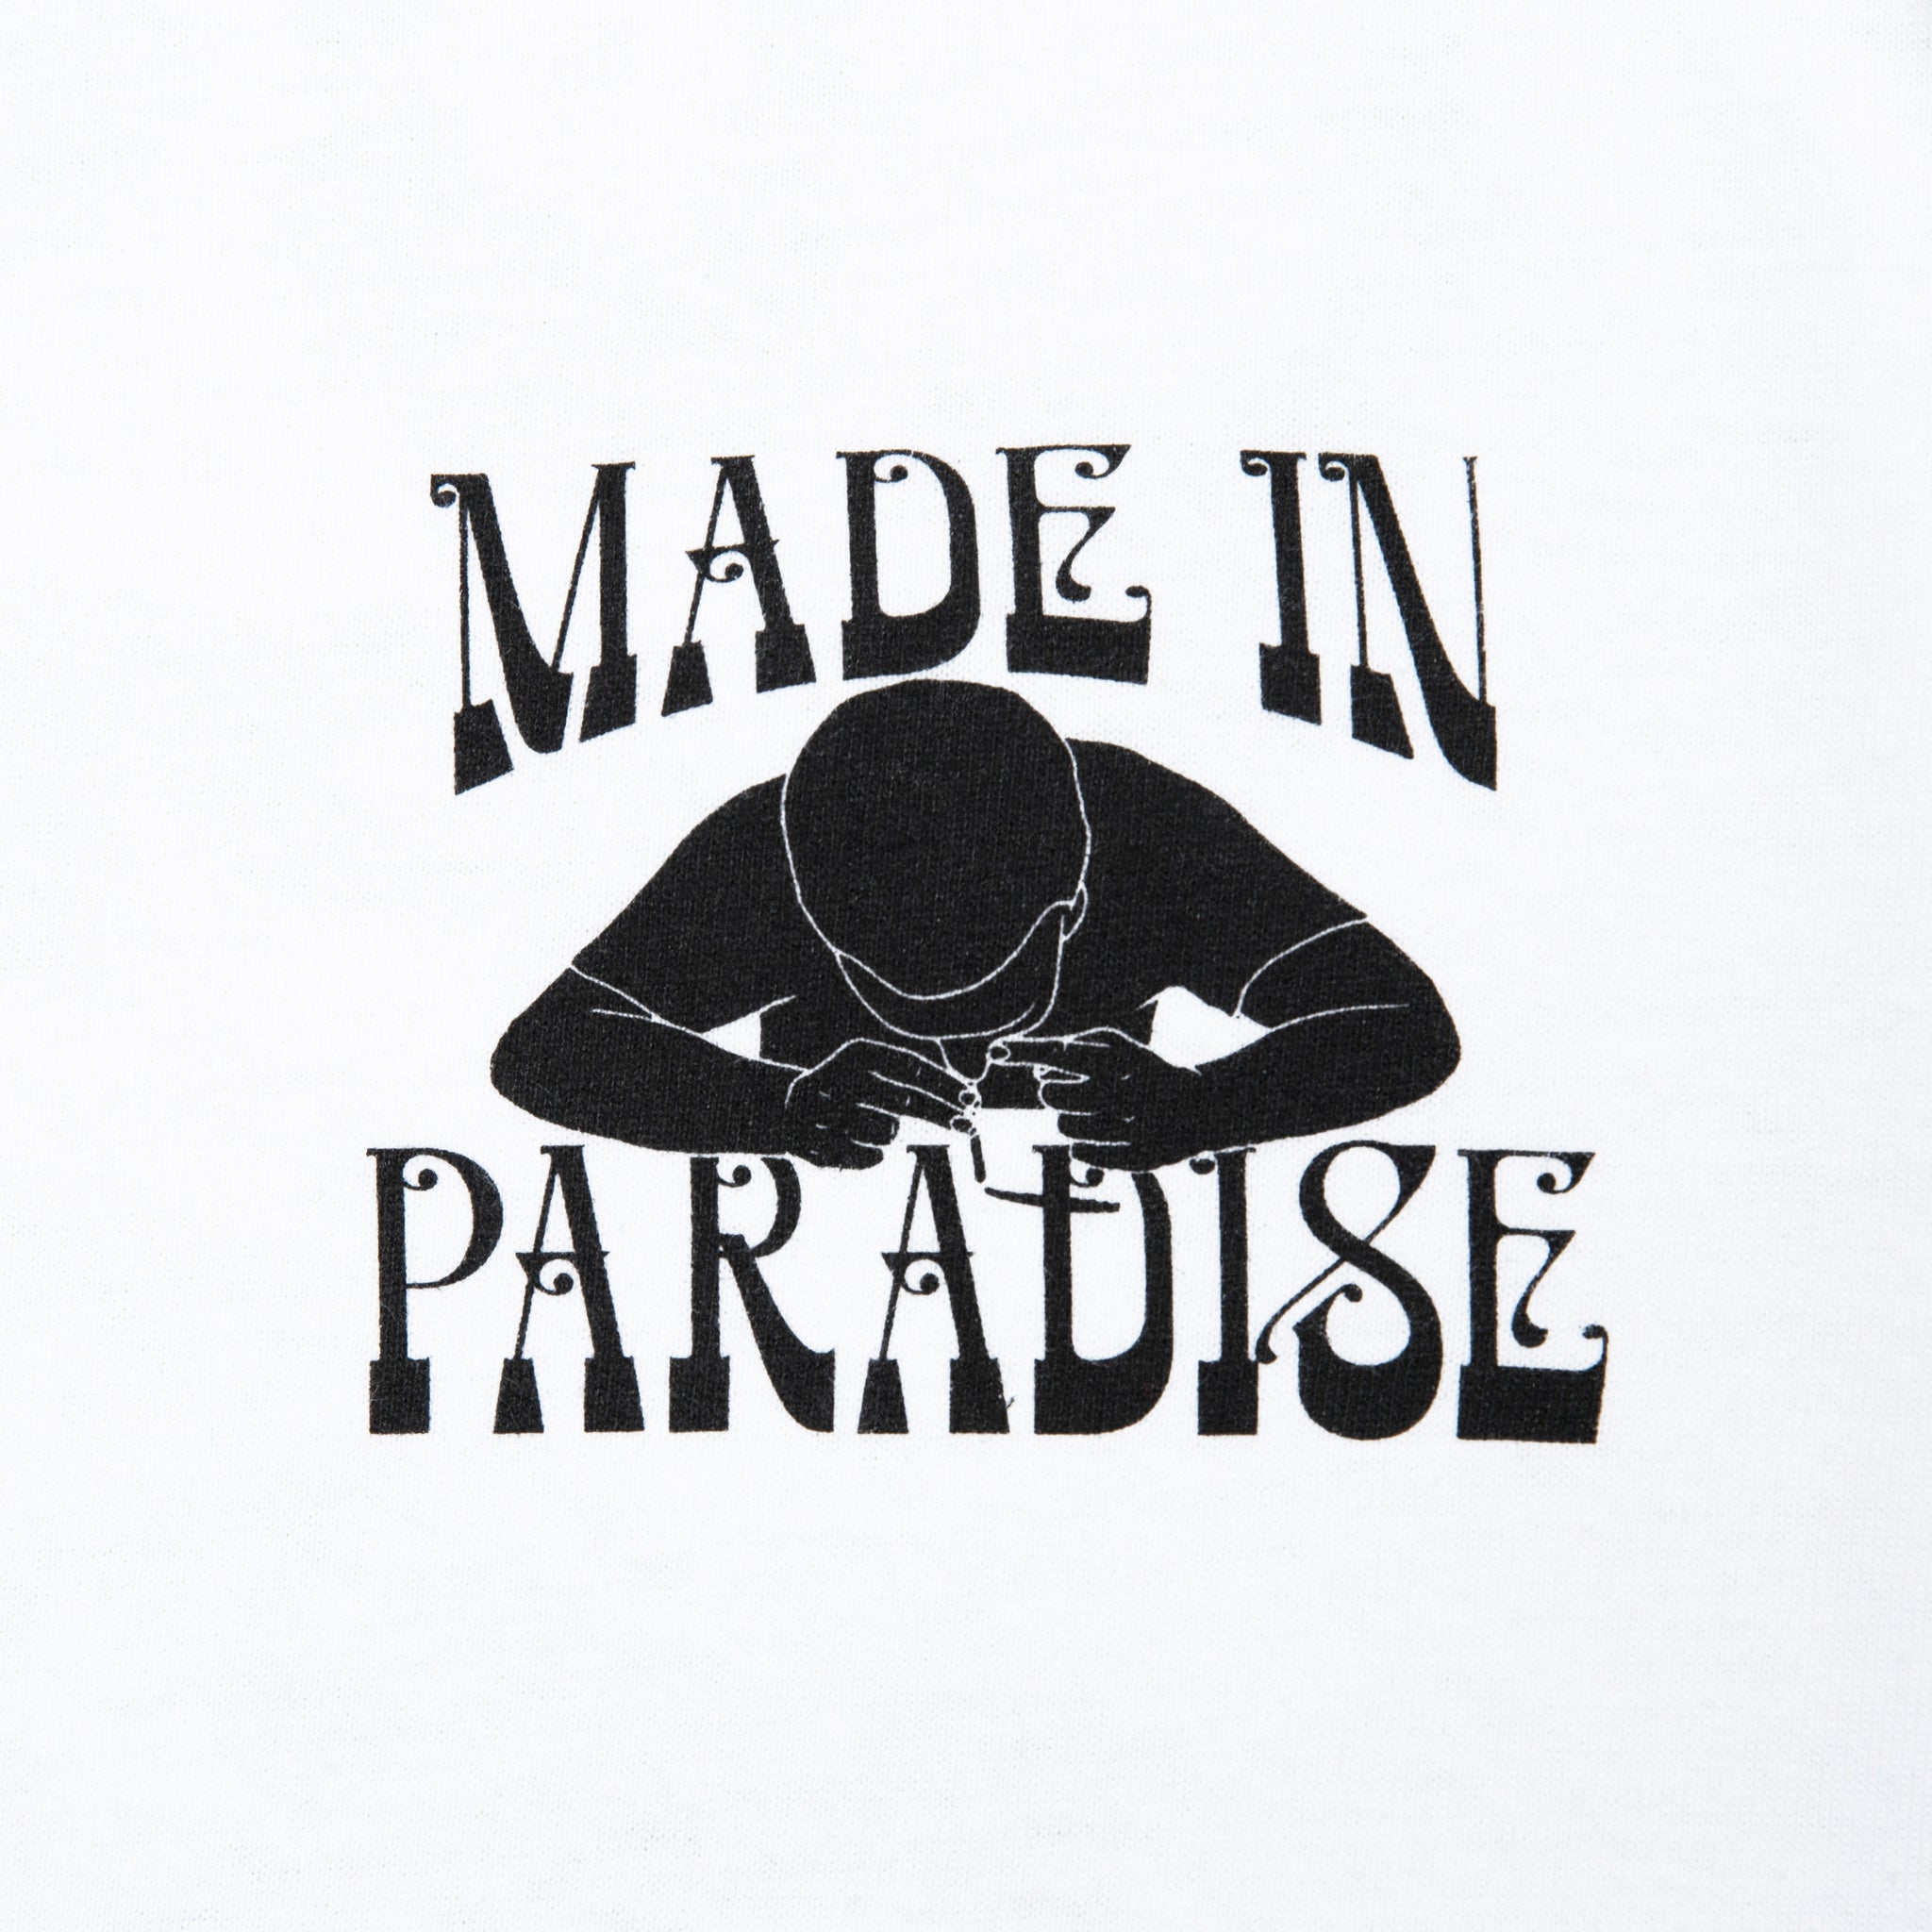 Close-up view of front graphic print of Made in Paradise World Drug Trade "COCAINE PRICES" white long sleeve t-shirt